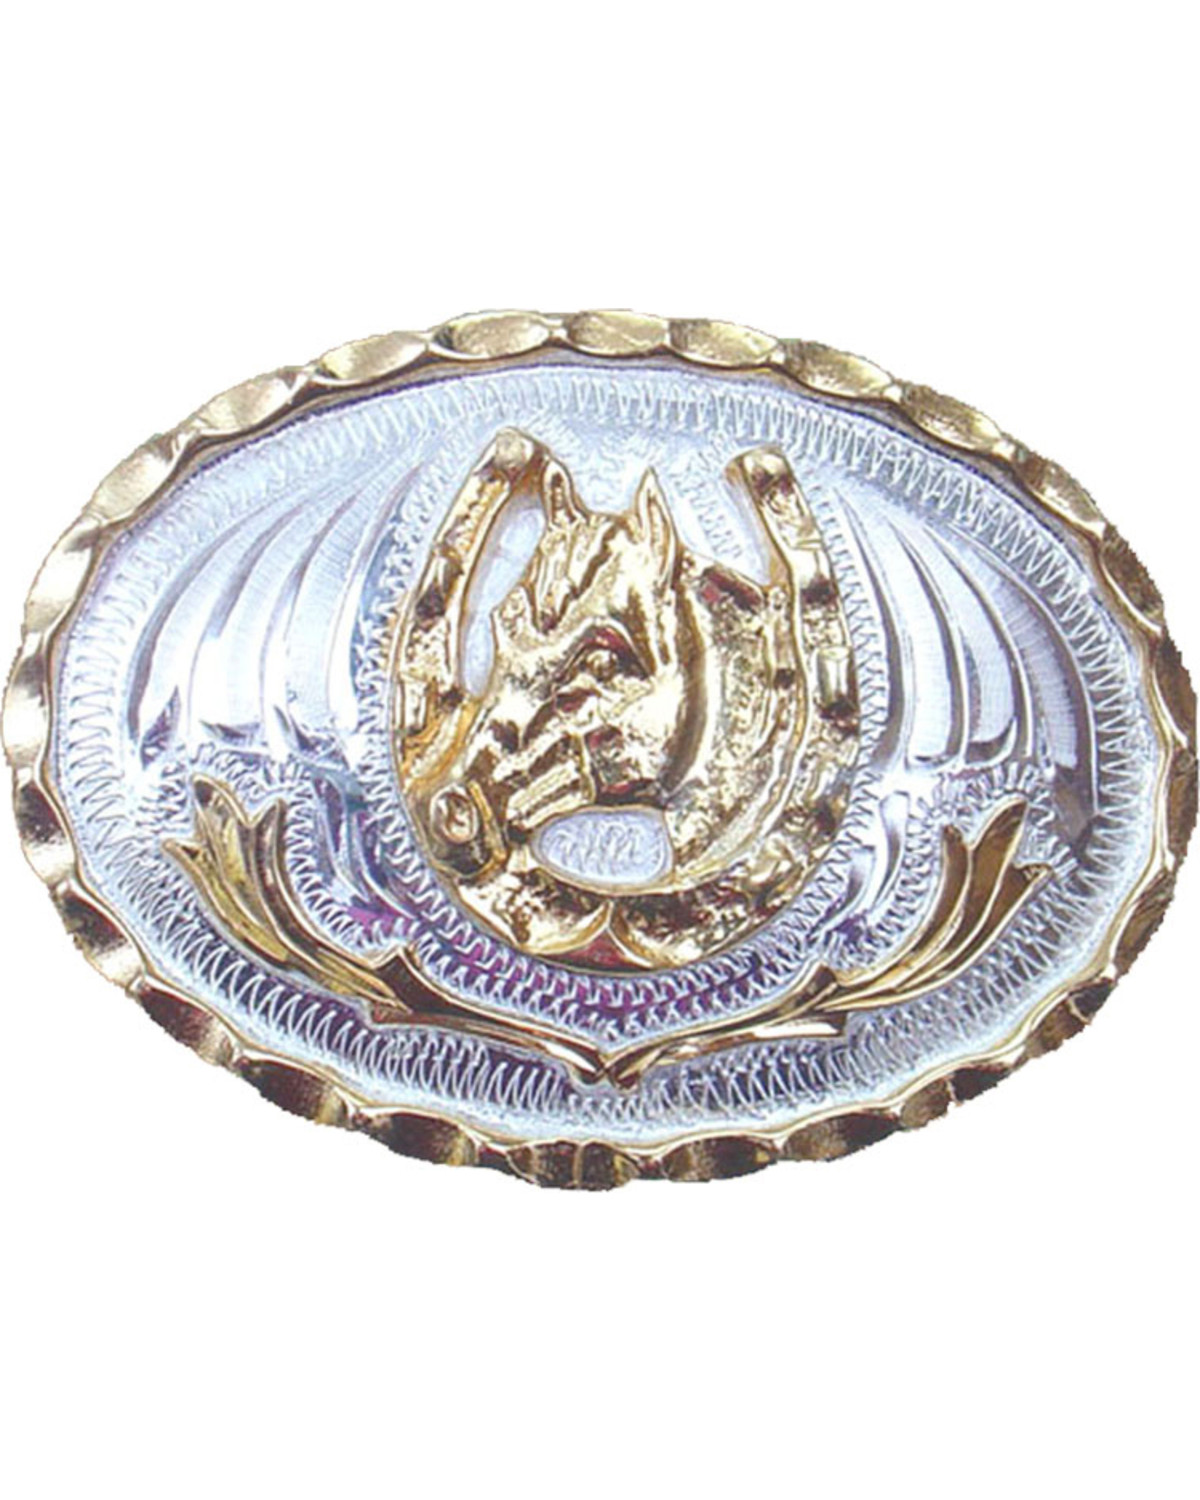 Western Express Men's Small Horsehead and Horseshoe Belt Buckle